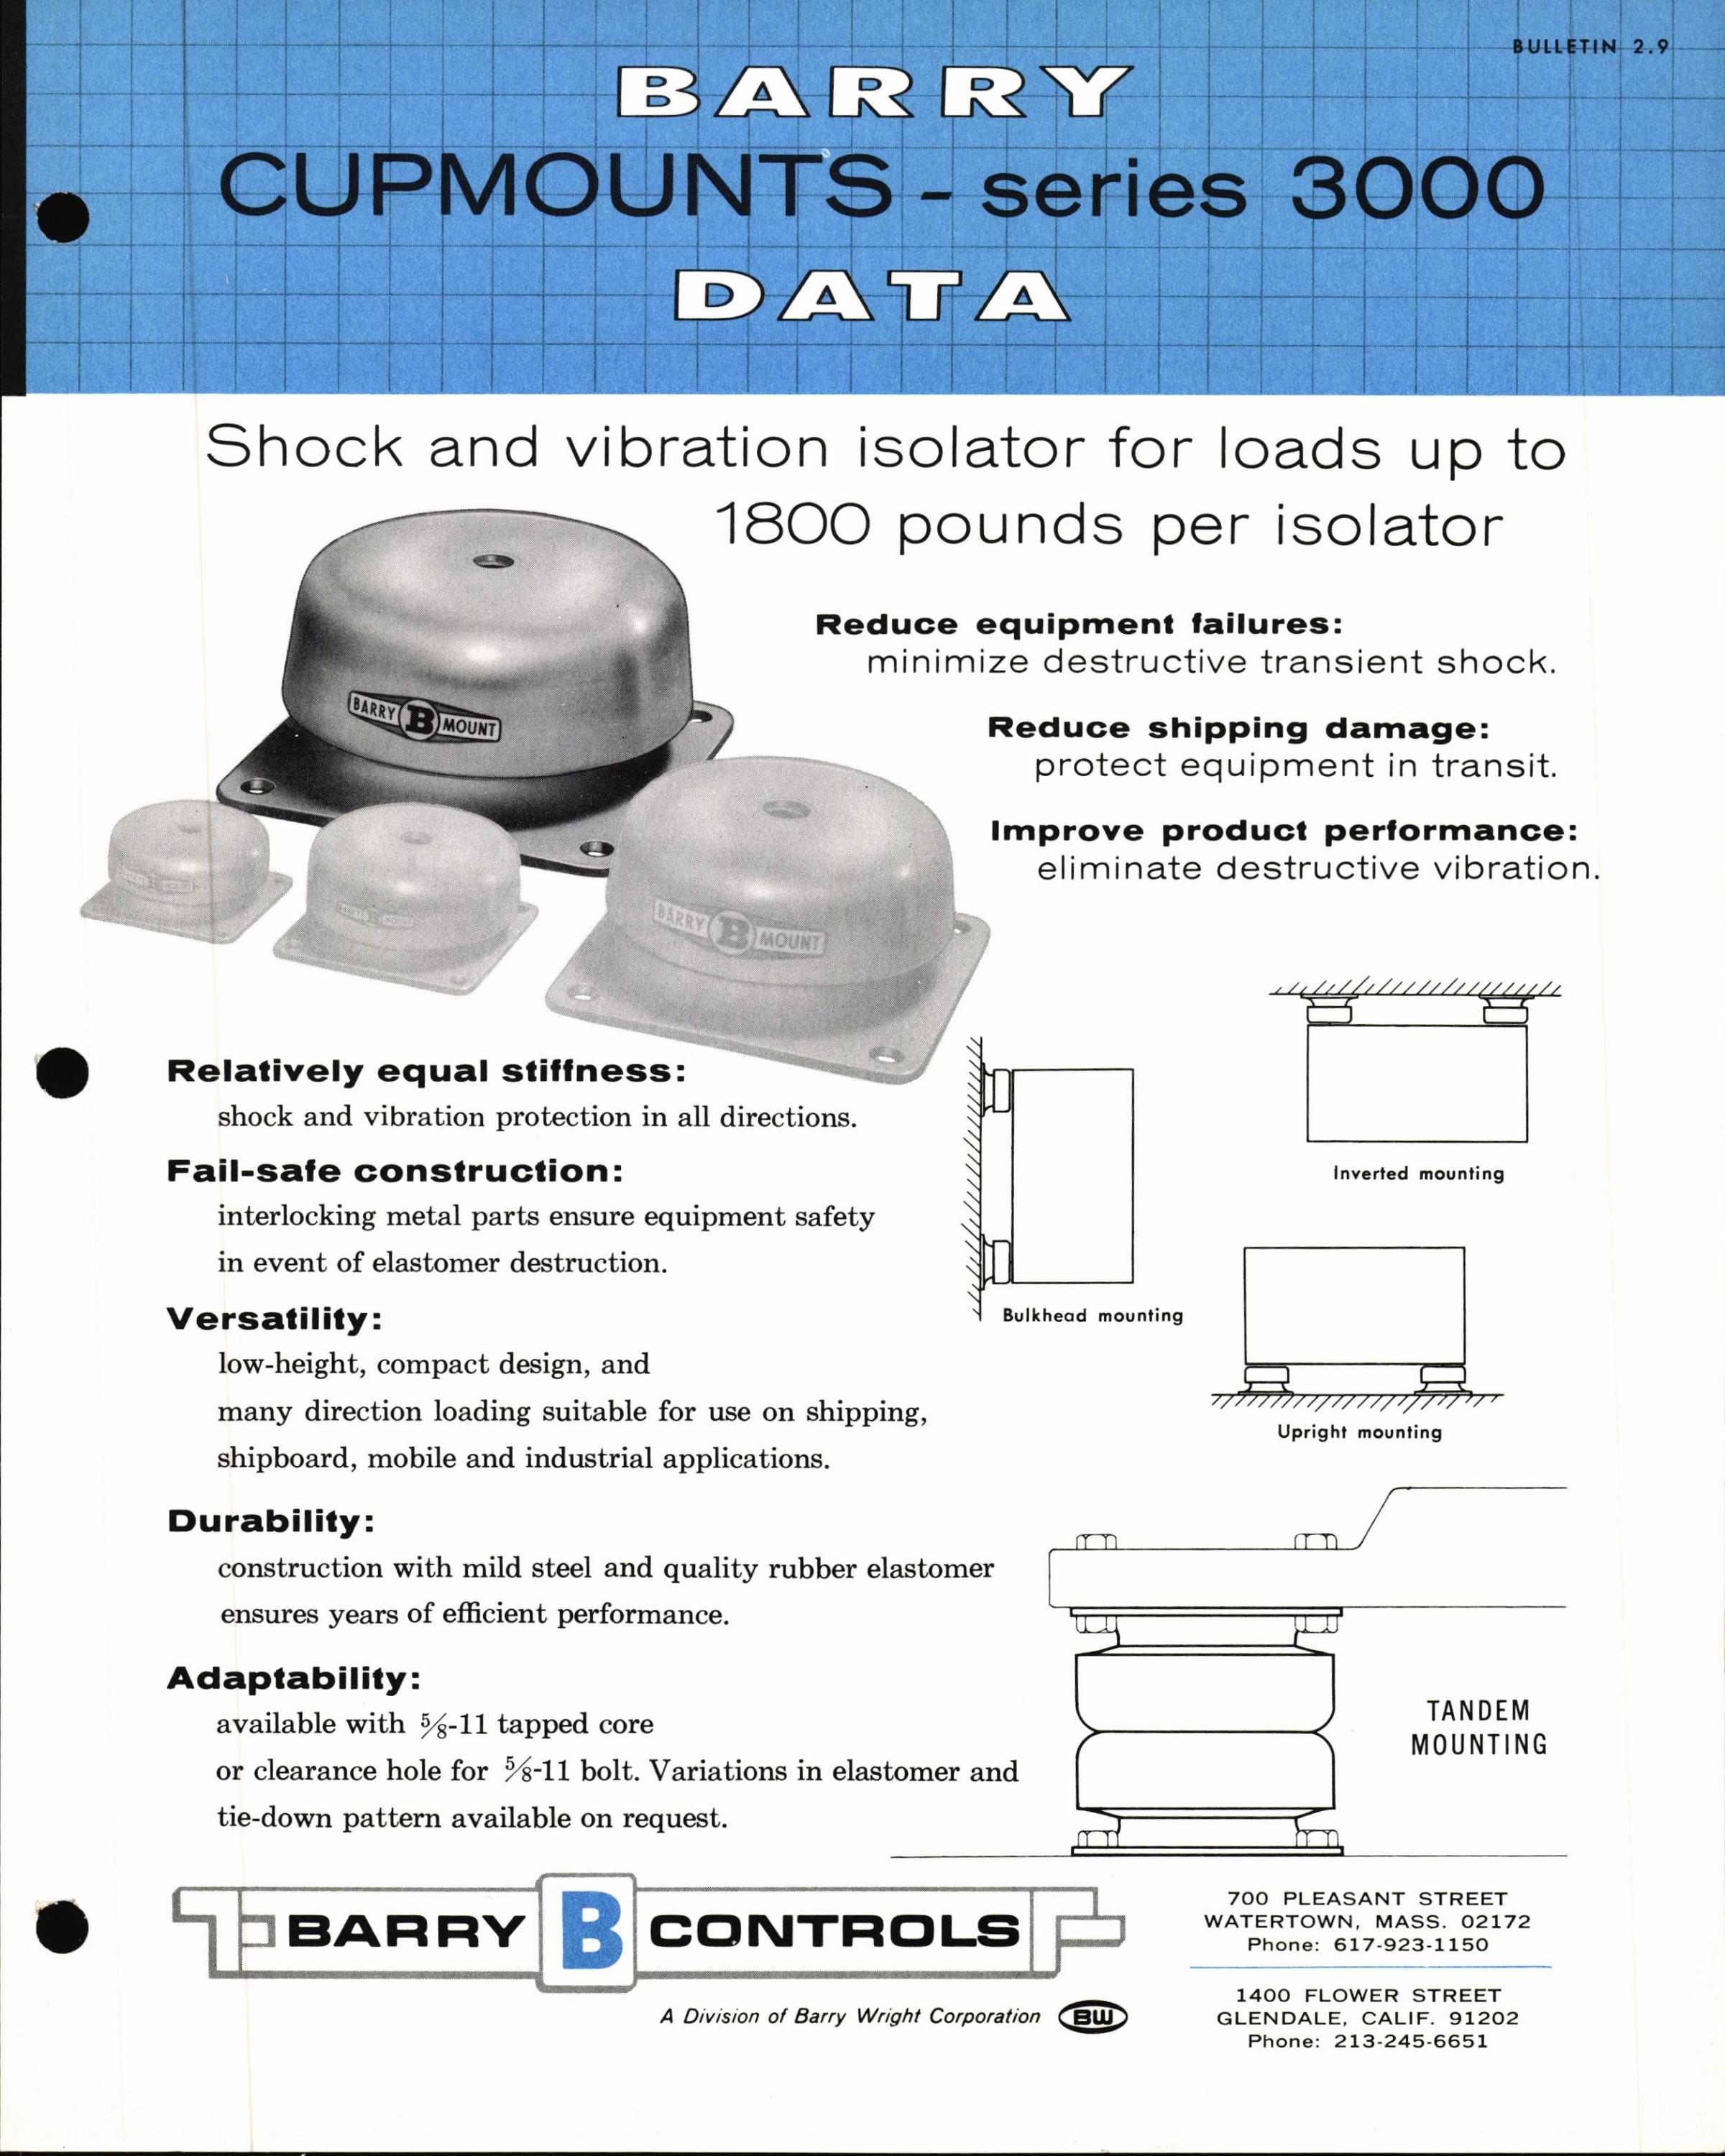 Sample page 44 from AirCorps Library document: Vibration and Shock Isolators